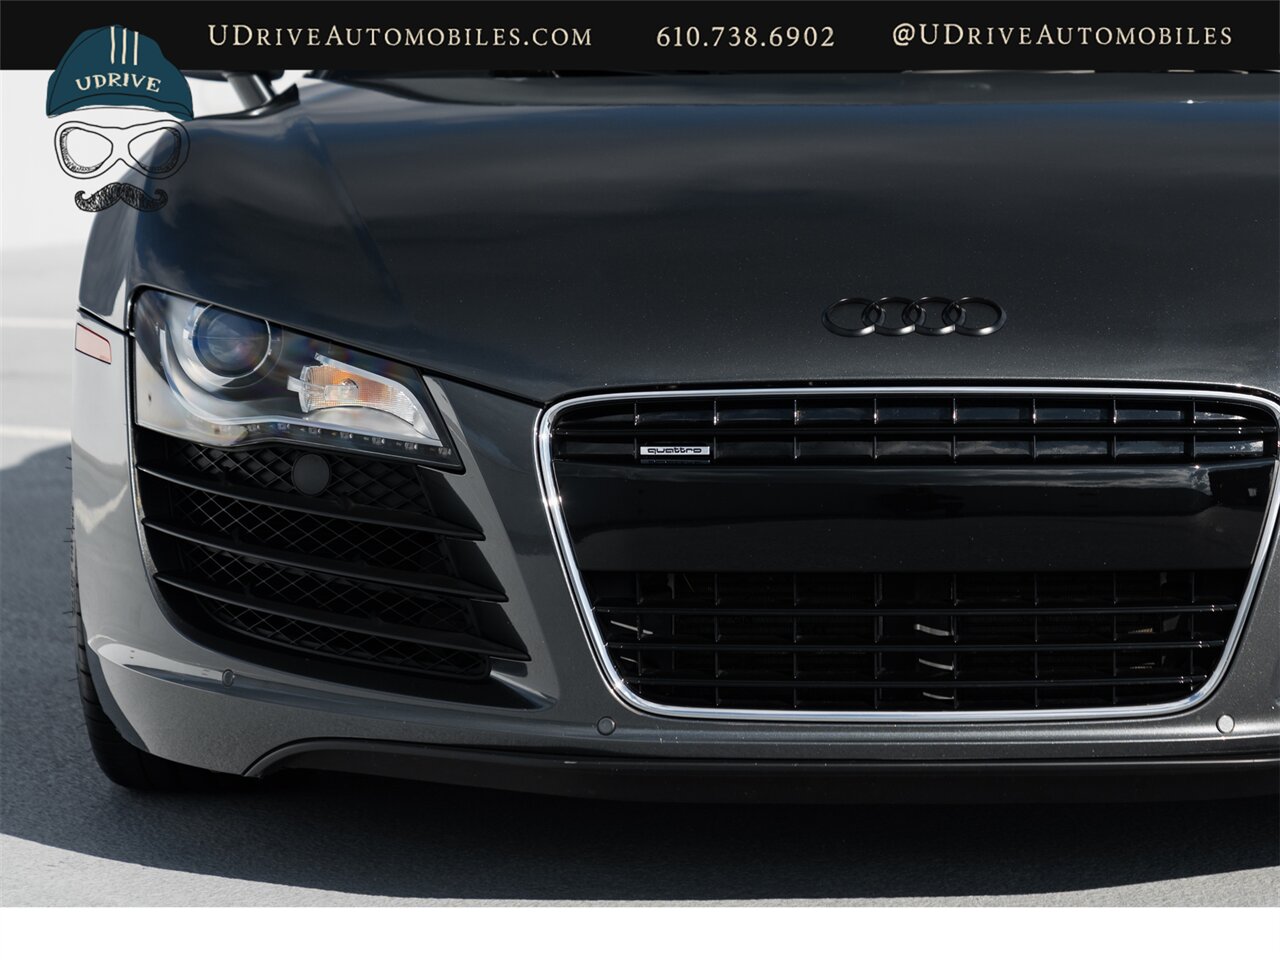 2009 Audi R8 Quattro  4.2 V8 6 Speed Manual 15k Miles - Photo 16 - West Chester, PA 19382